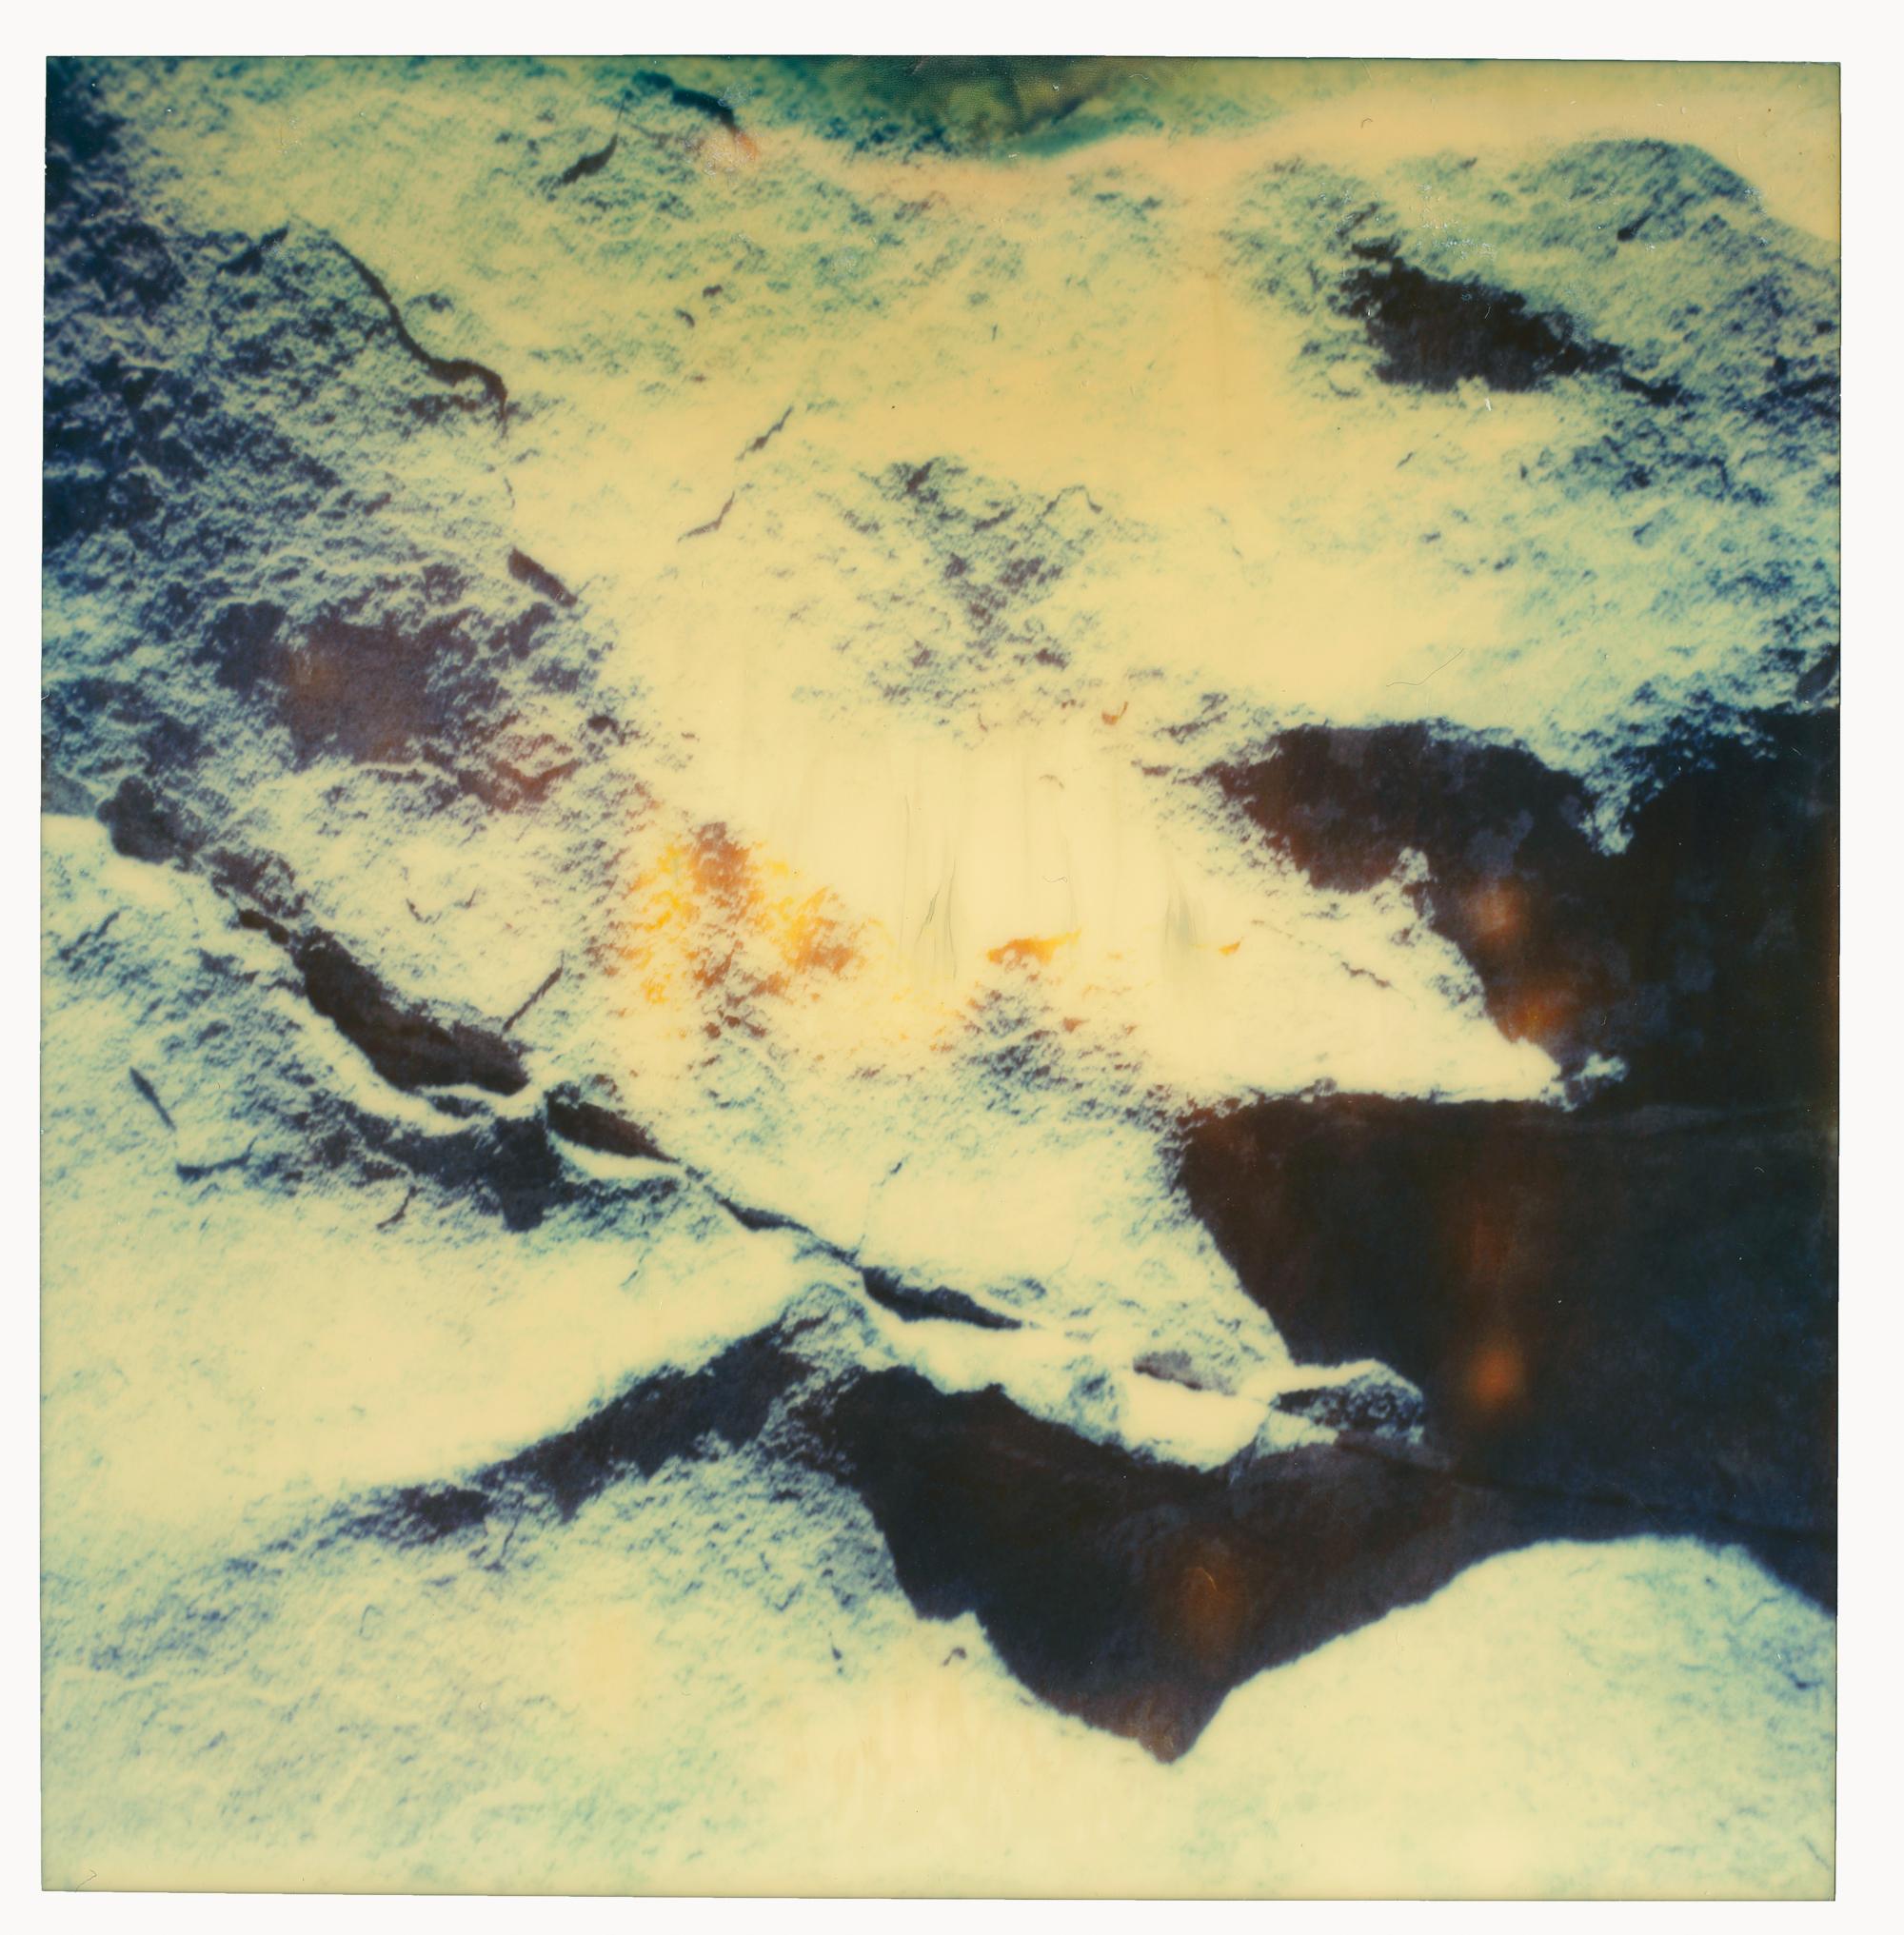 Planet of the Apes - 7 pieces complete Series - Polaroid, Color - Contemporary Photograph by Stefanie Schneider